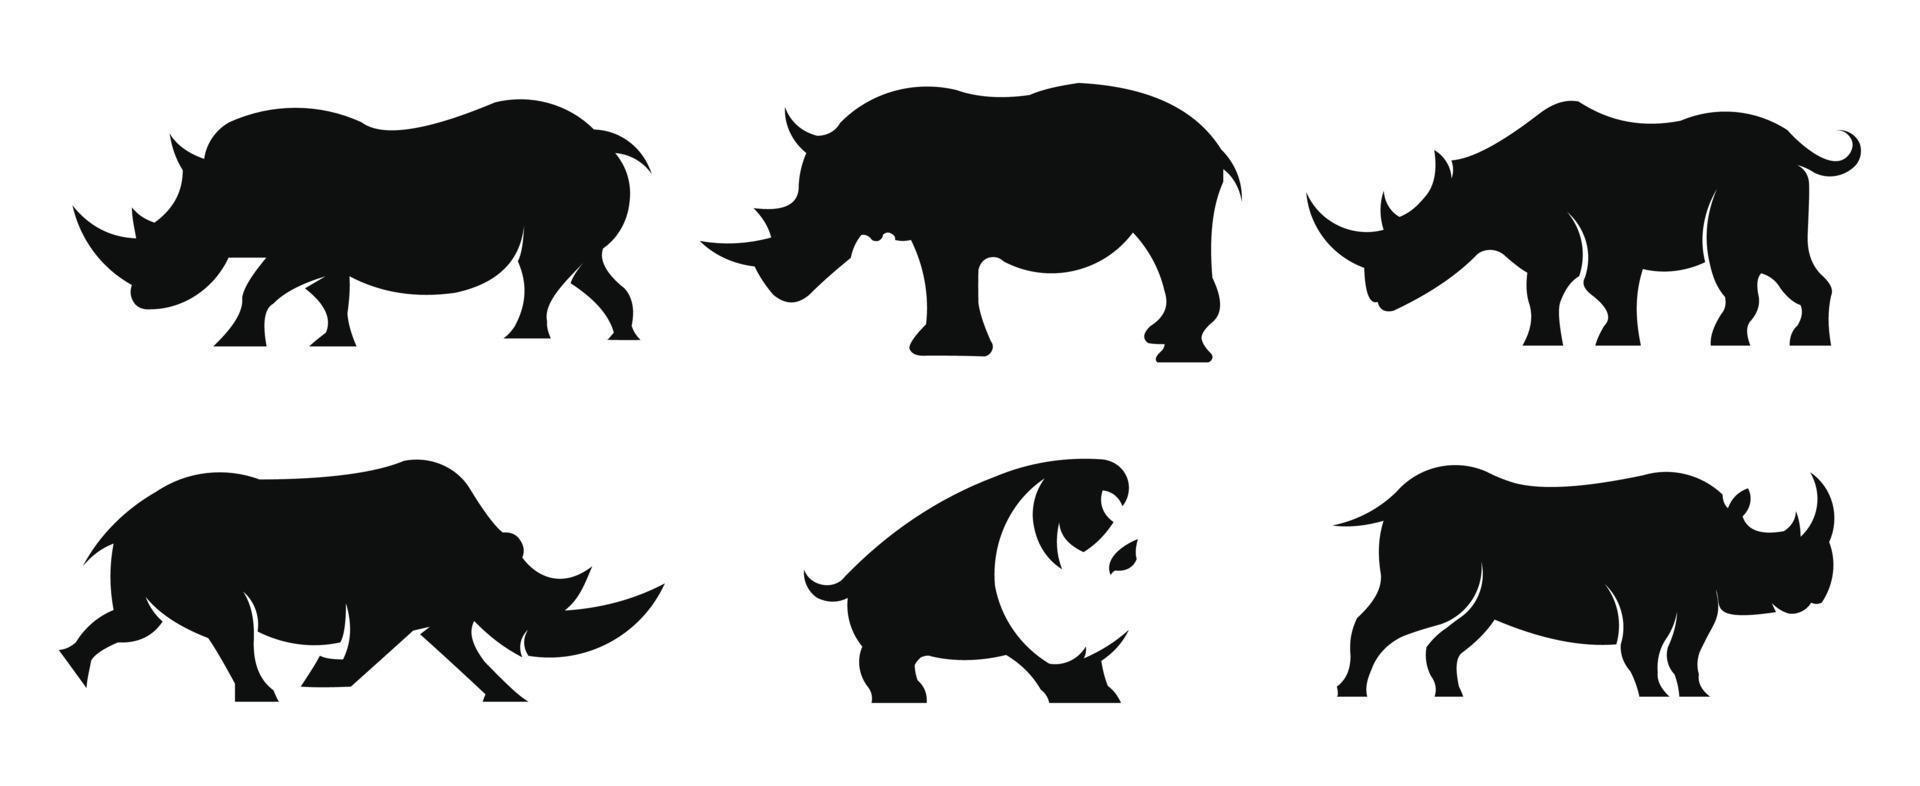 Rhinoceros vector silhouette illustration isolated . Rhino silhouette. Animal from Africa.